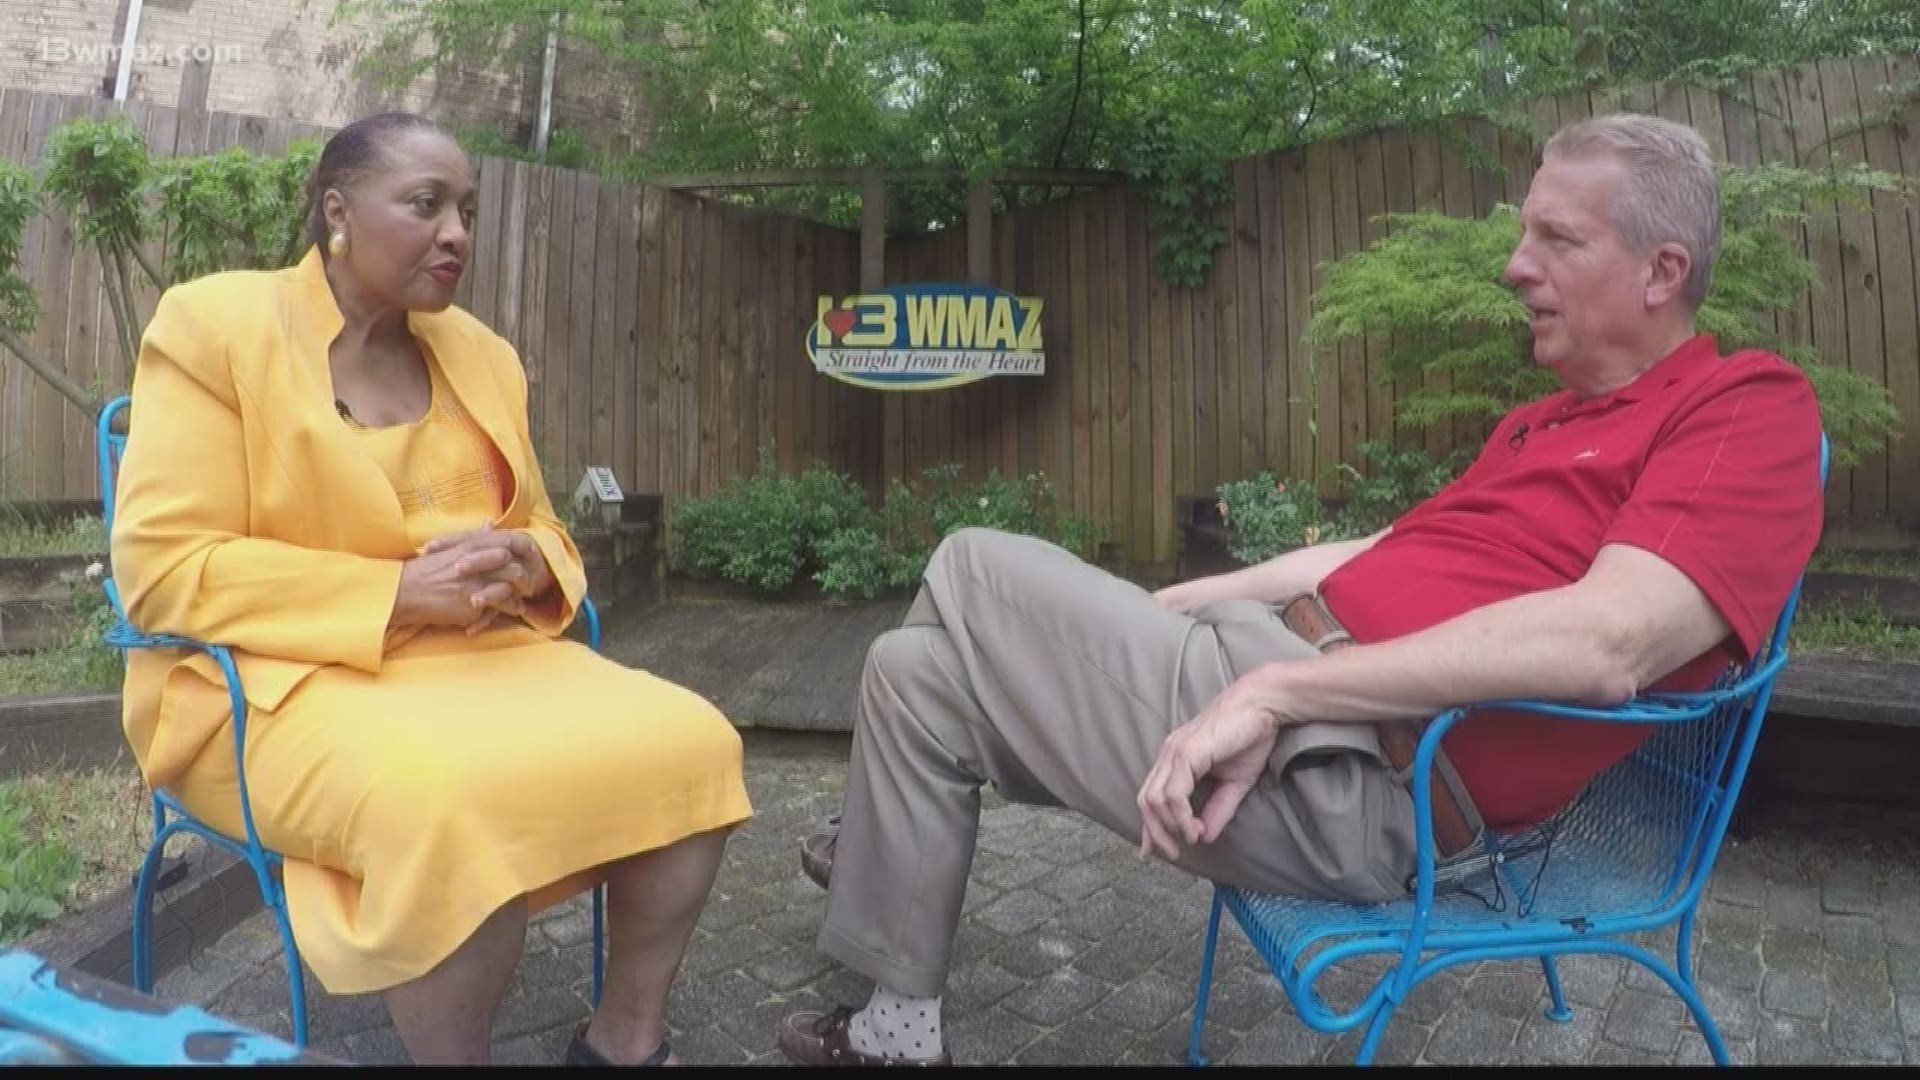 Frank Malloy sat down with 13WMAZ anchor Tina Hicks, a woman known for her humble spirit and strong work ethic. If you ask any person who grew up watching 13WMAZ, they'll probably mention her as one of their all-time favorites.